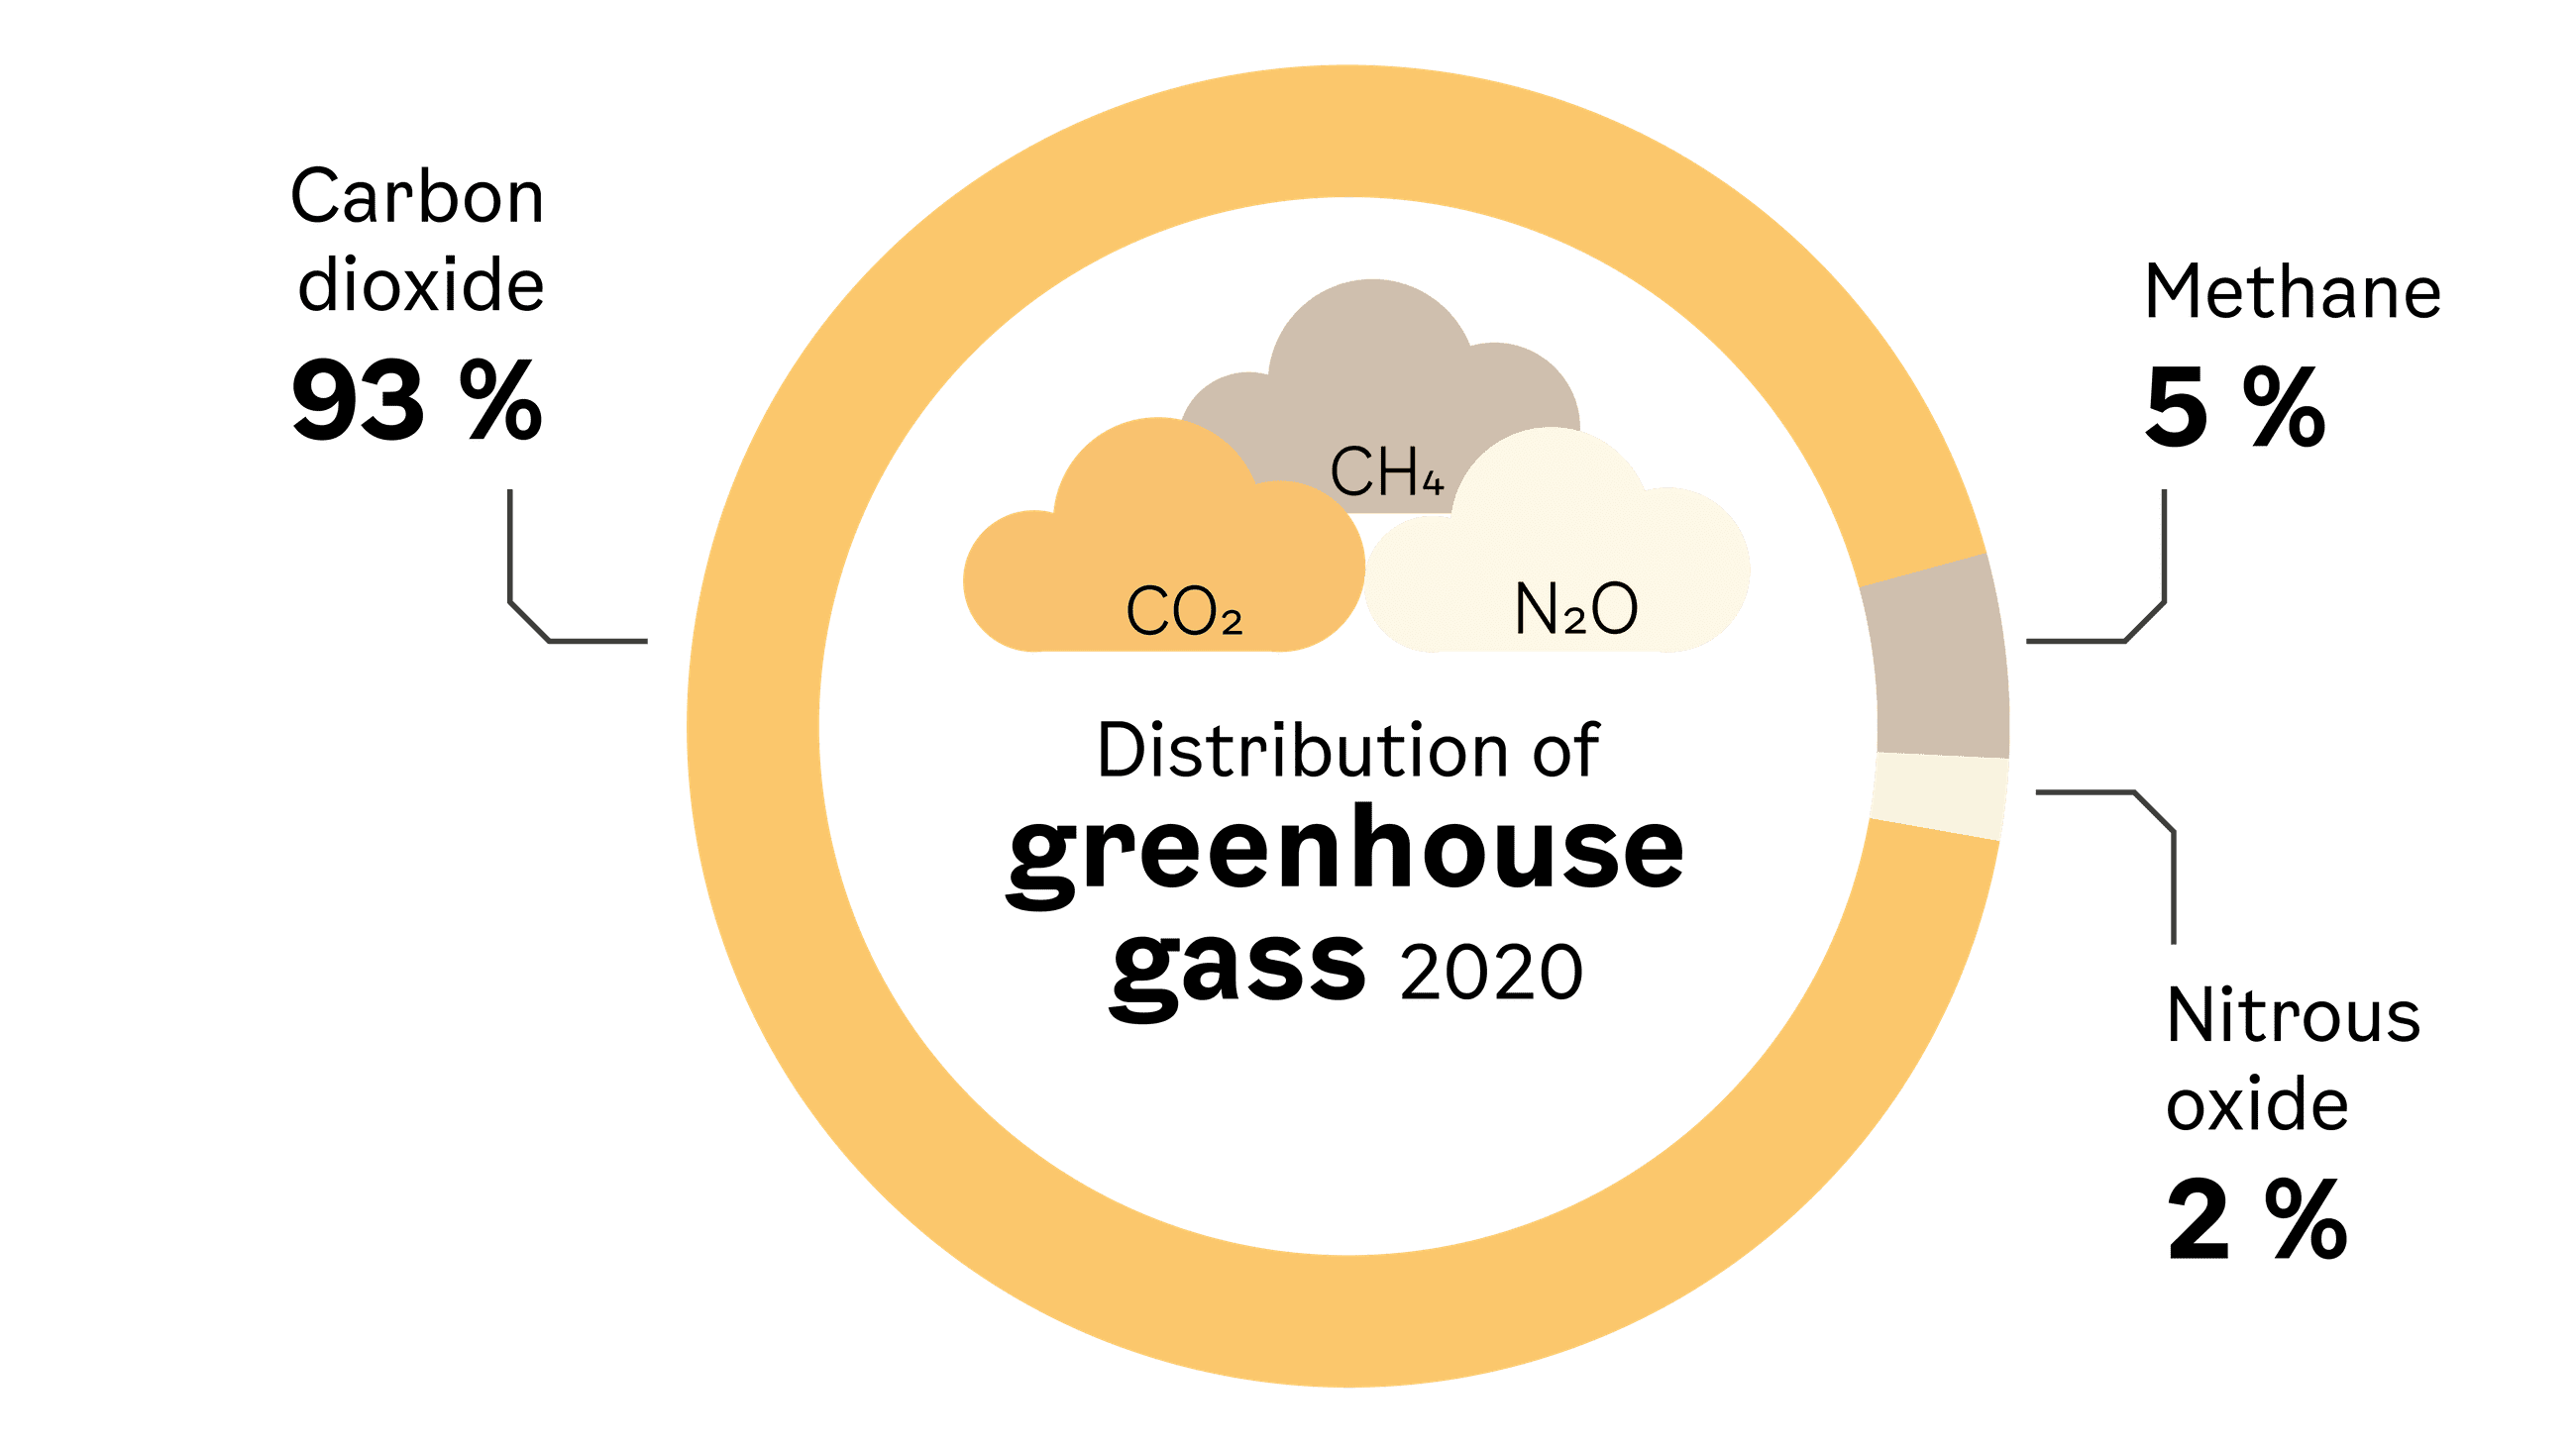 Greenhouse gas inventory for Oslo